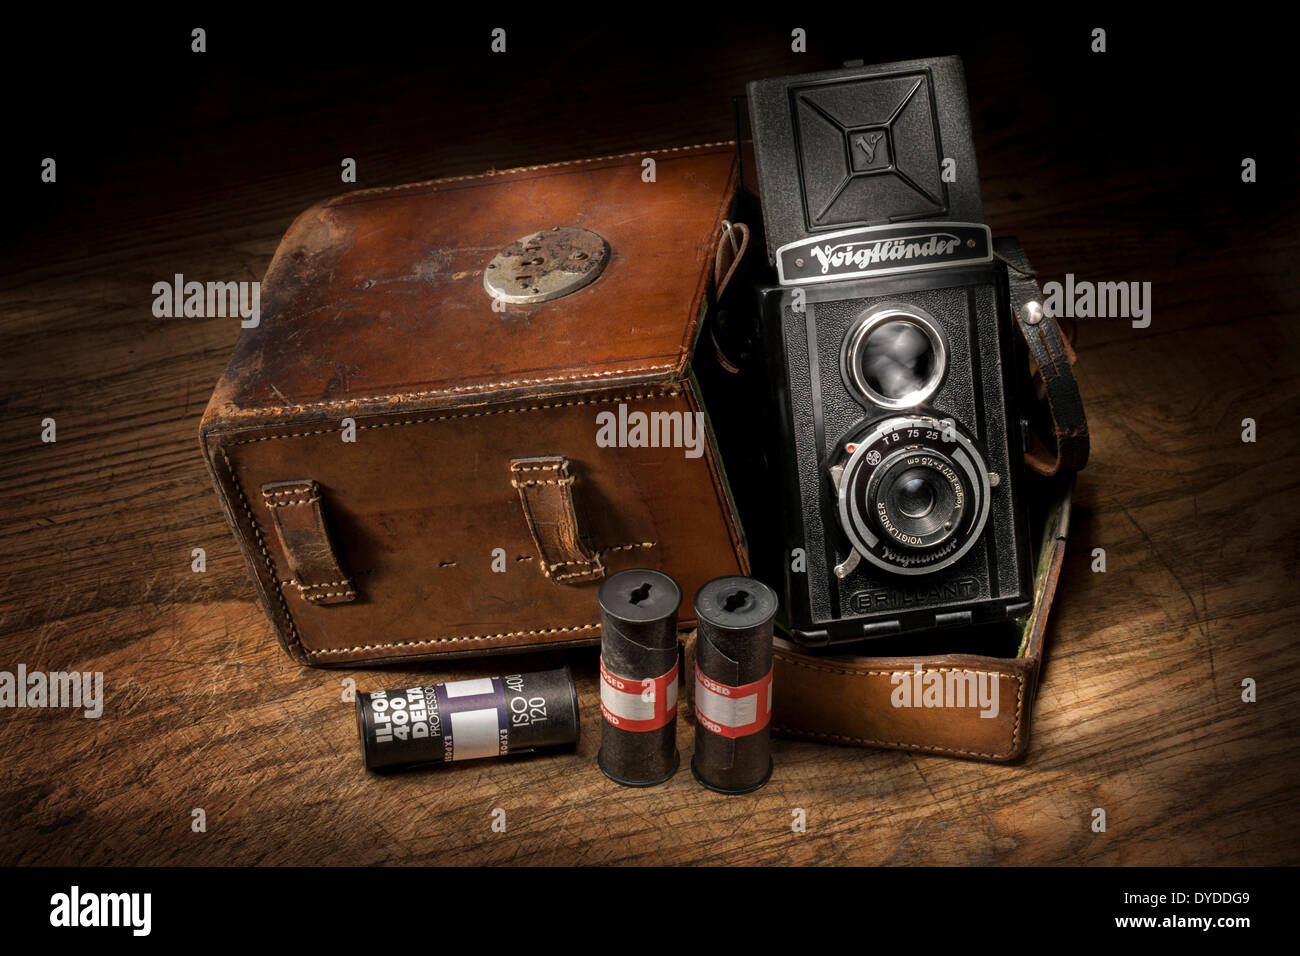 Vintage Voigtlander Brilliant camera with leather case and roll films. Stock Photo